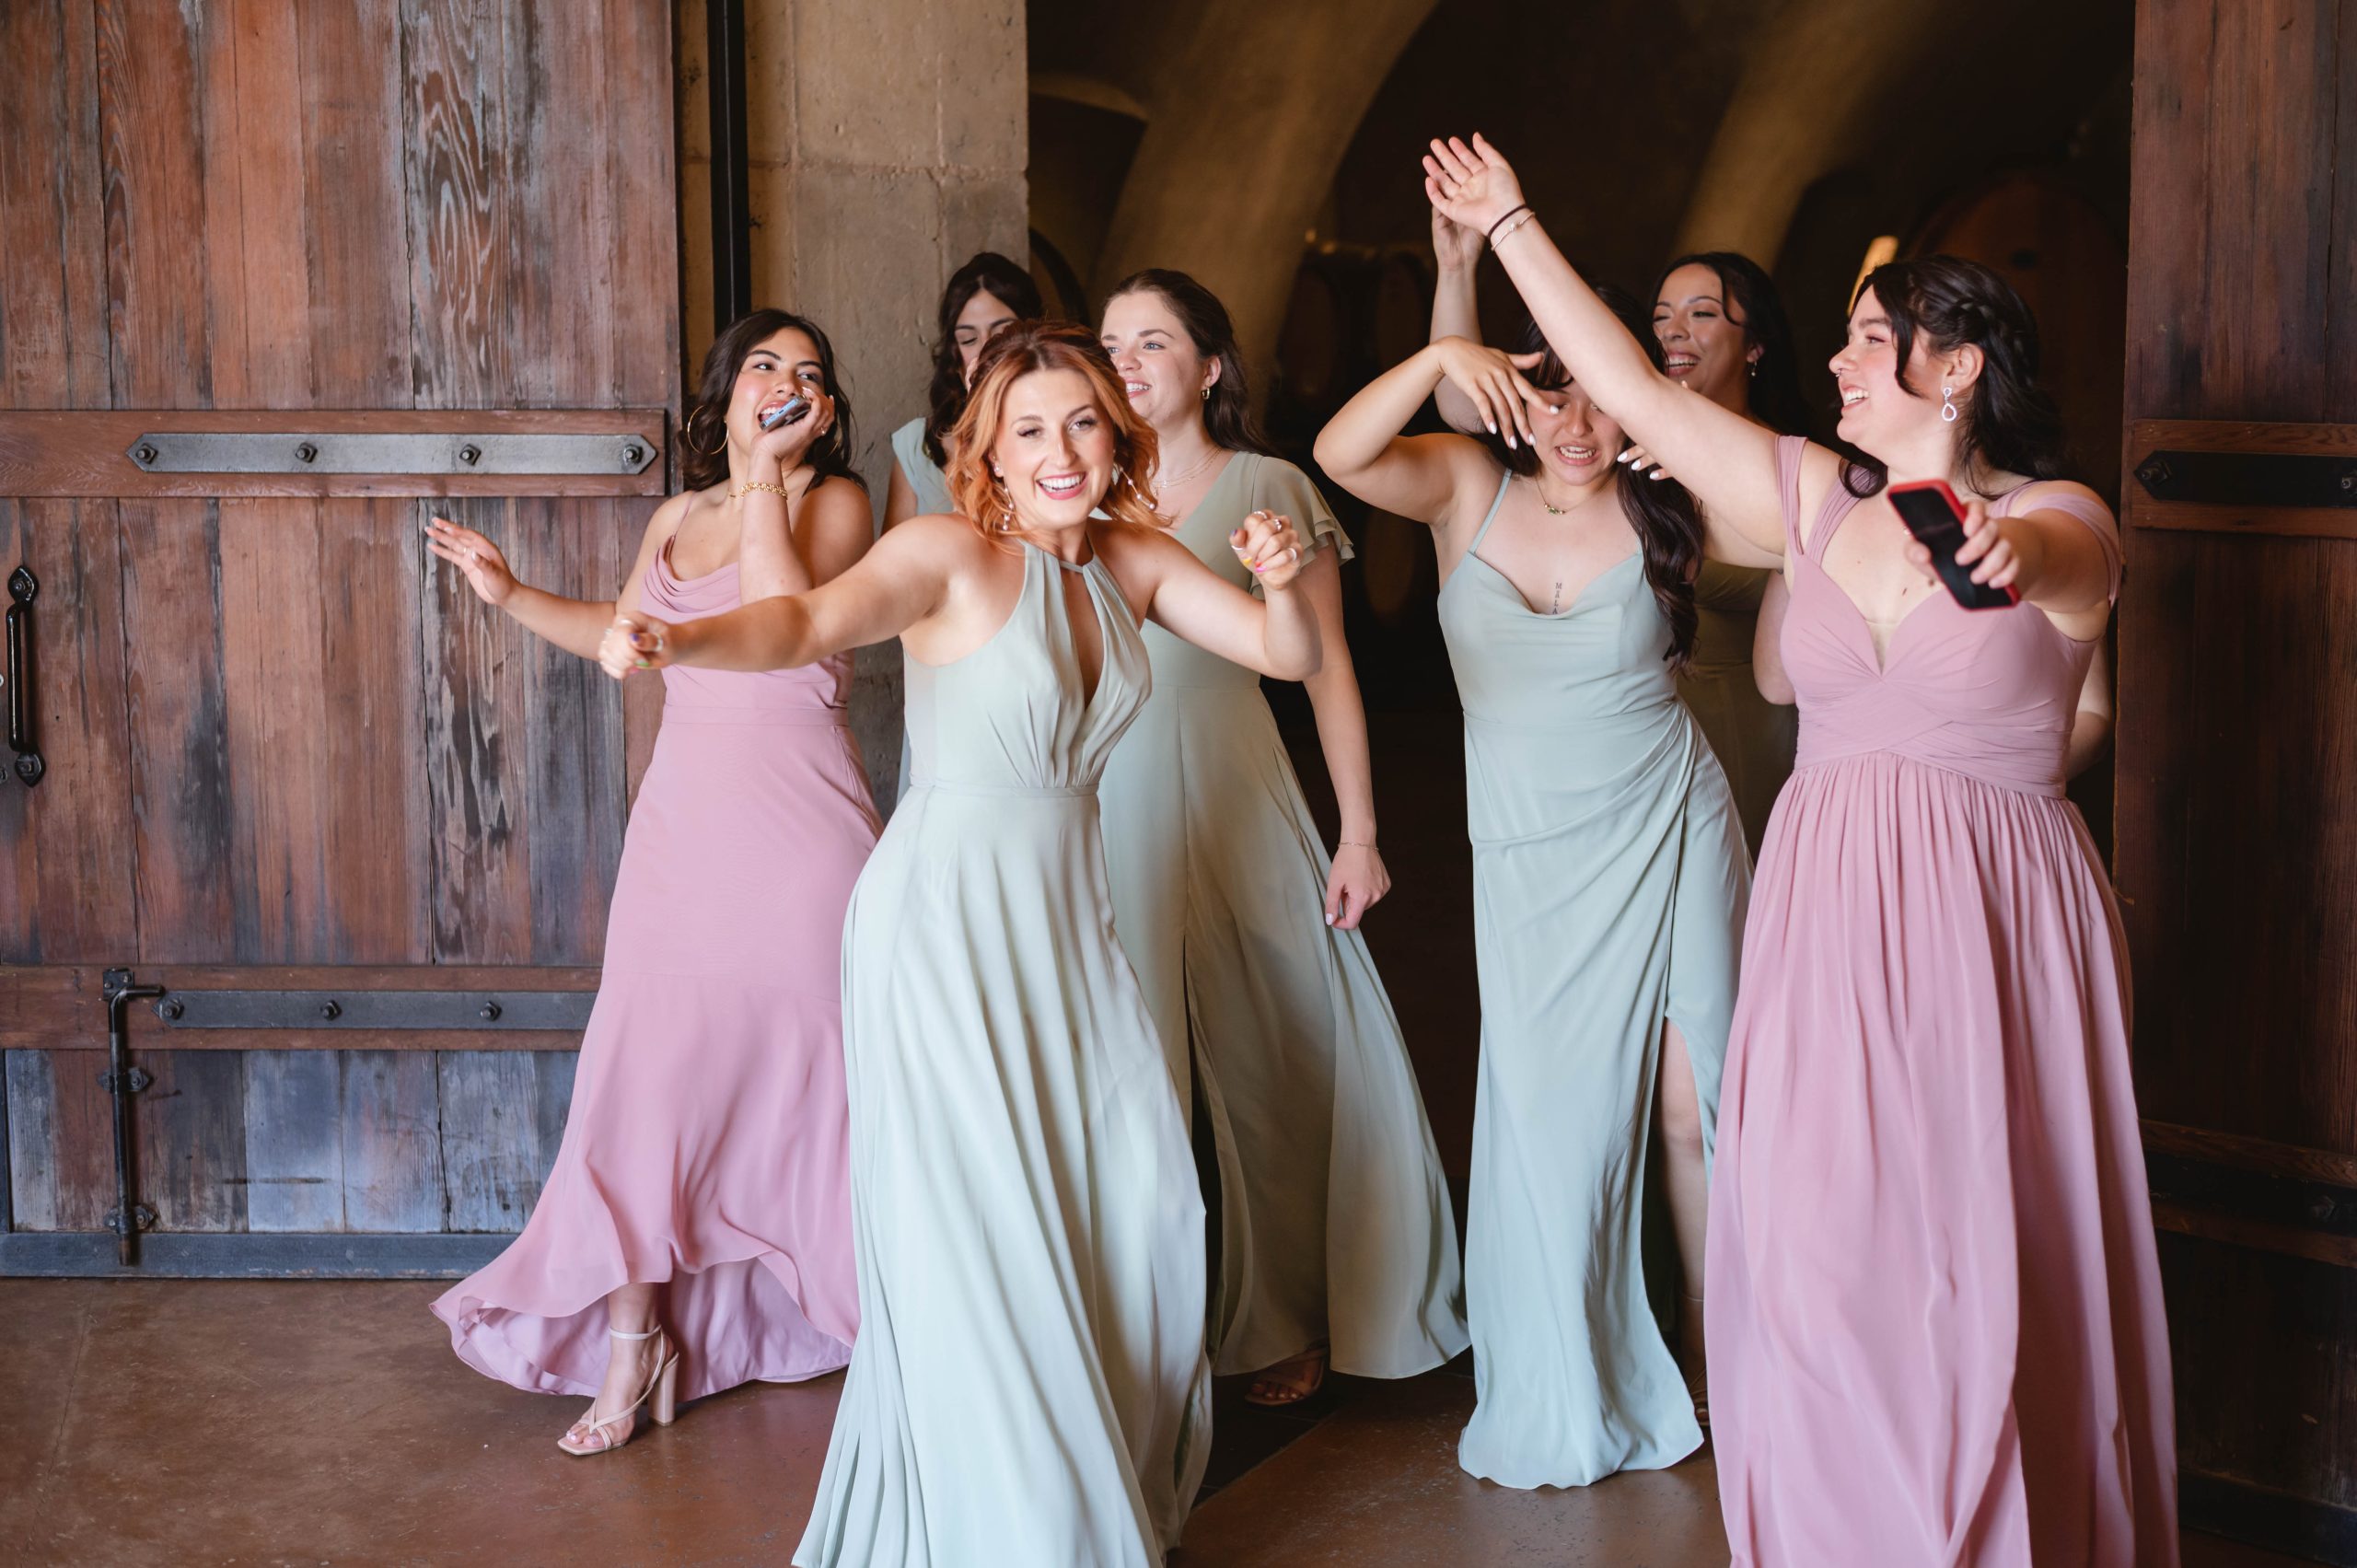 Bridesmaids and Maid of honor MOH dancing with excitement to see the bride reveal her wedding dress to them at Viansa Winery in Sonoma